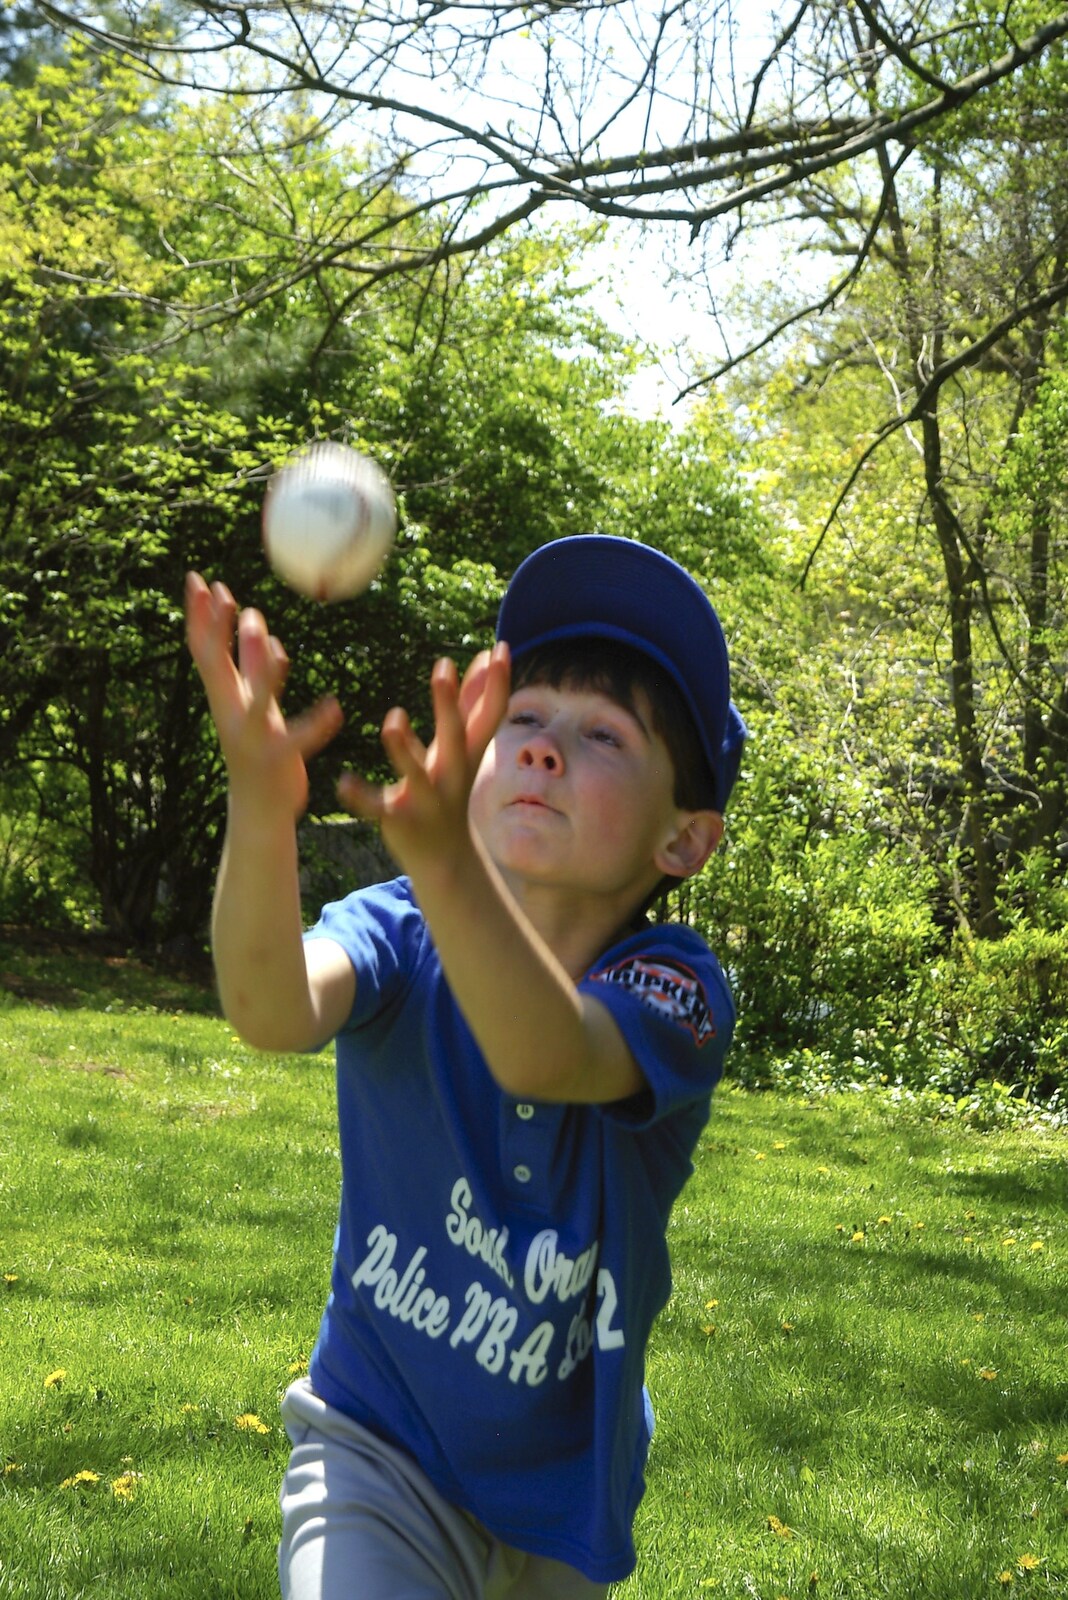 Practicing catching from Maplewood and Little-League Baseball, New Jersey - 29th April 2006